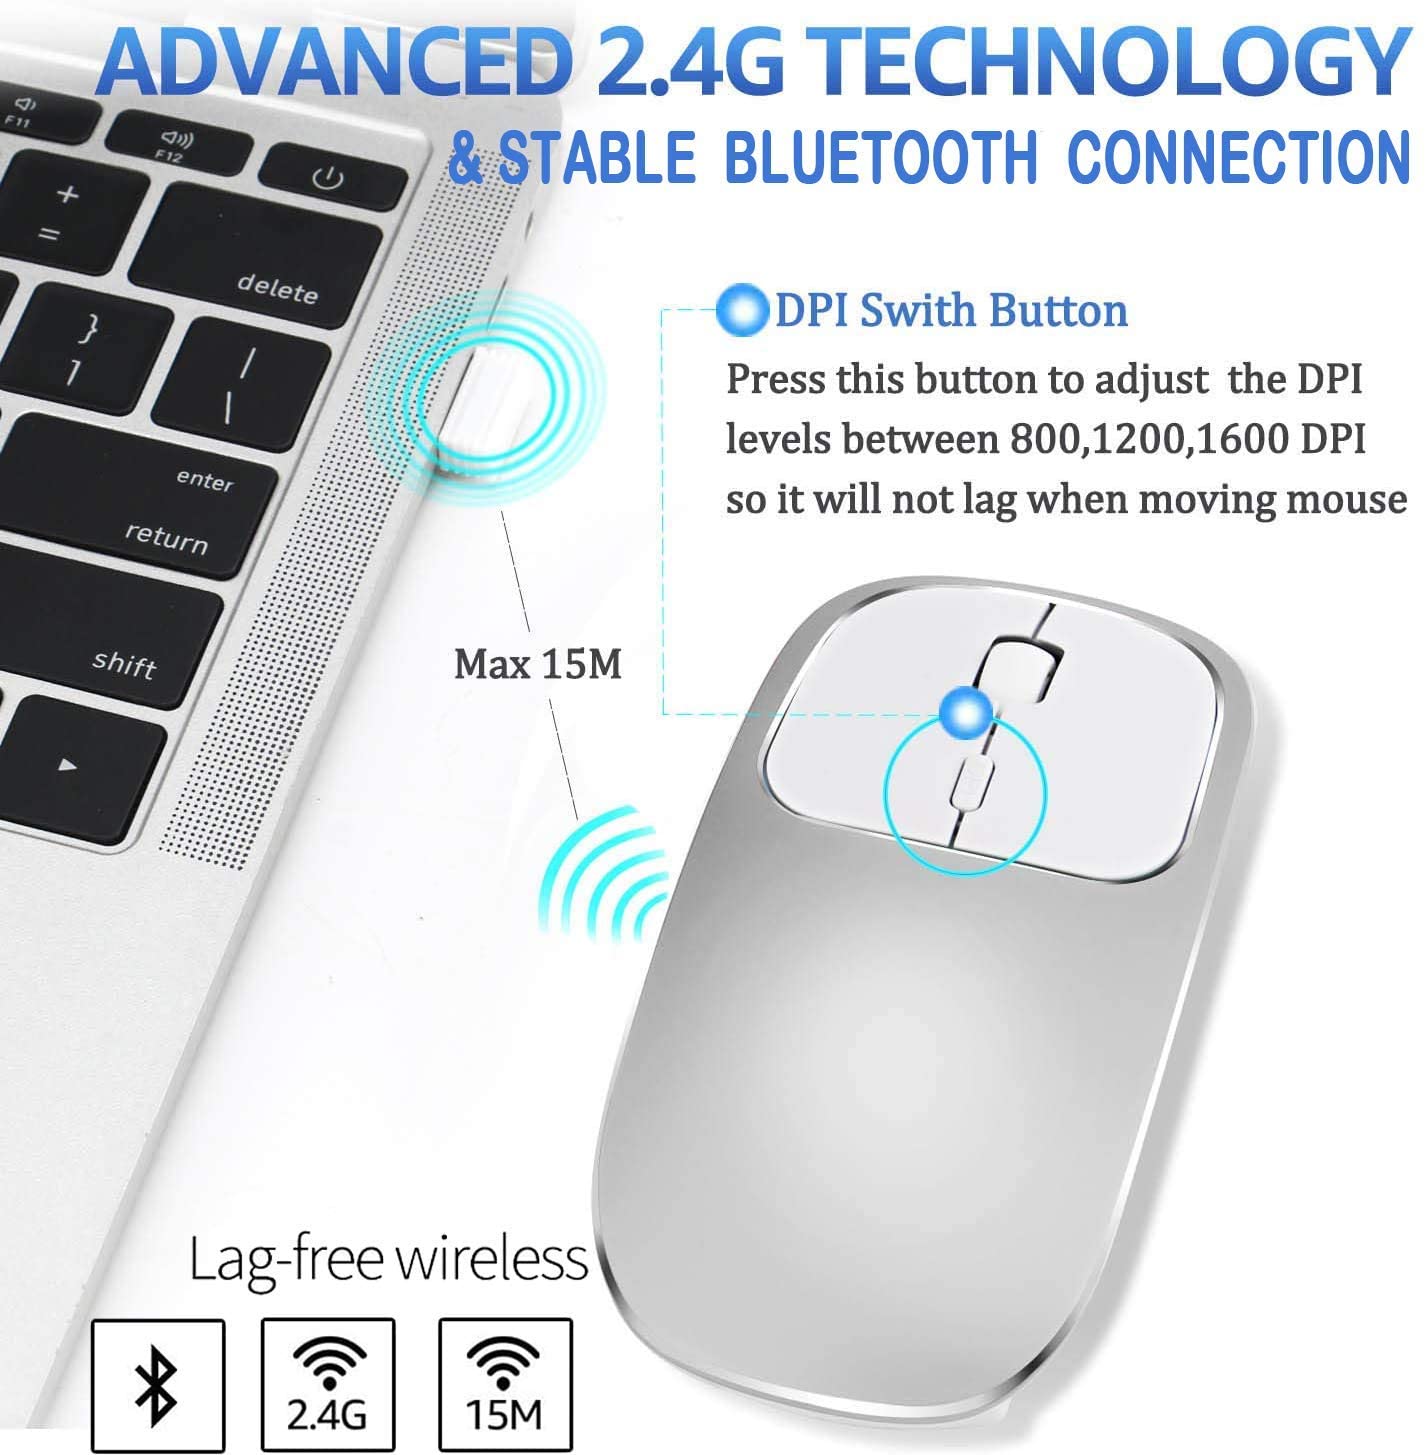 FRUITFUL-Wireless-Rechargeable-Mouses-2-4G-and-Bluetooth-5-0-Metal-Dual-Mode-Mouses-1600DPI-Silent-Mouse-with-USB-C-Port-for-PC-Tablet-Mac-Desktop-Etc-9